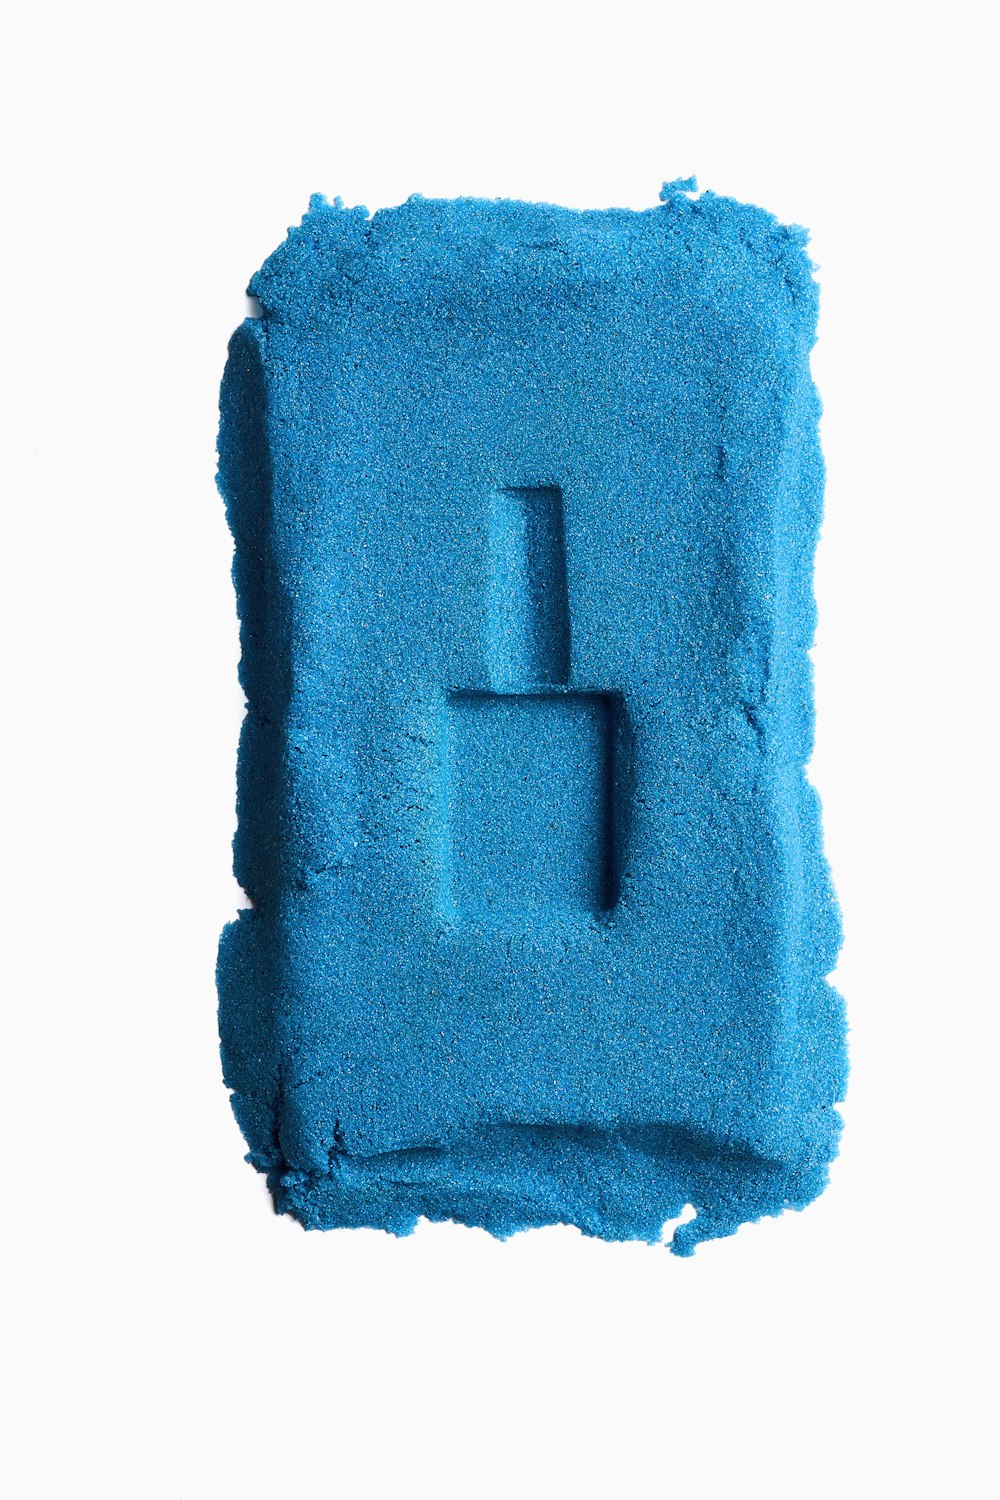 a blue substance with the letter e in it